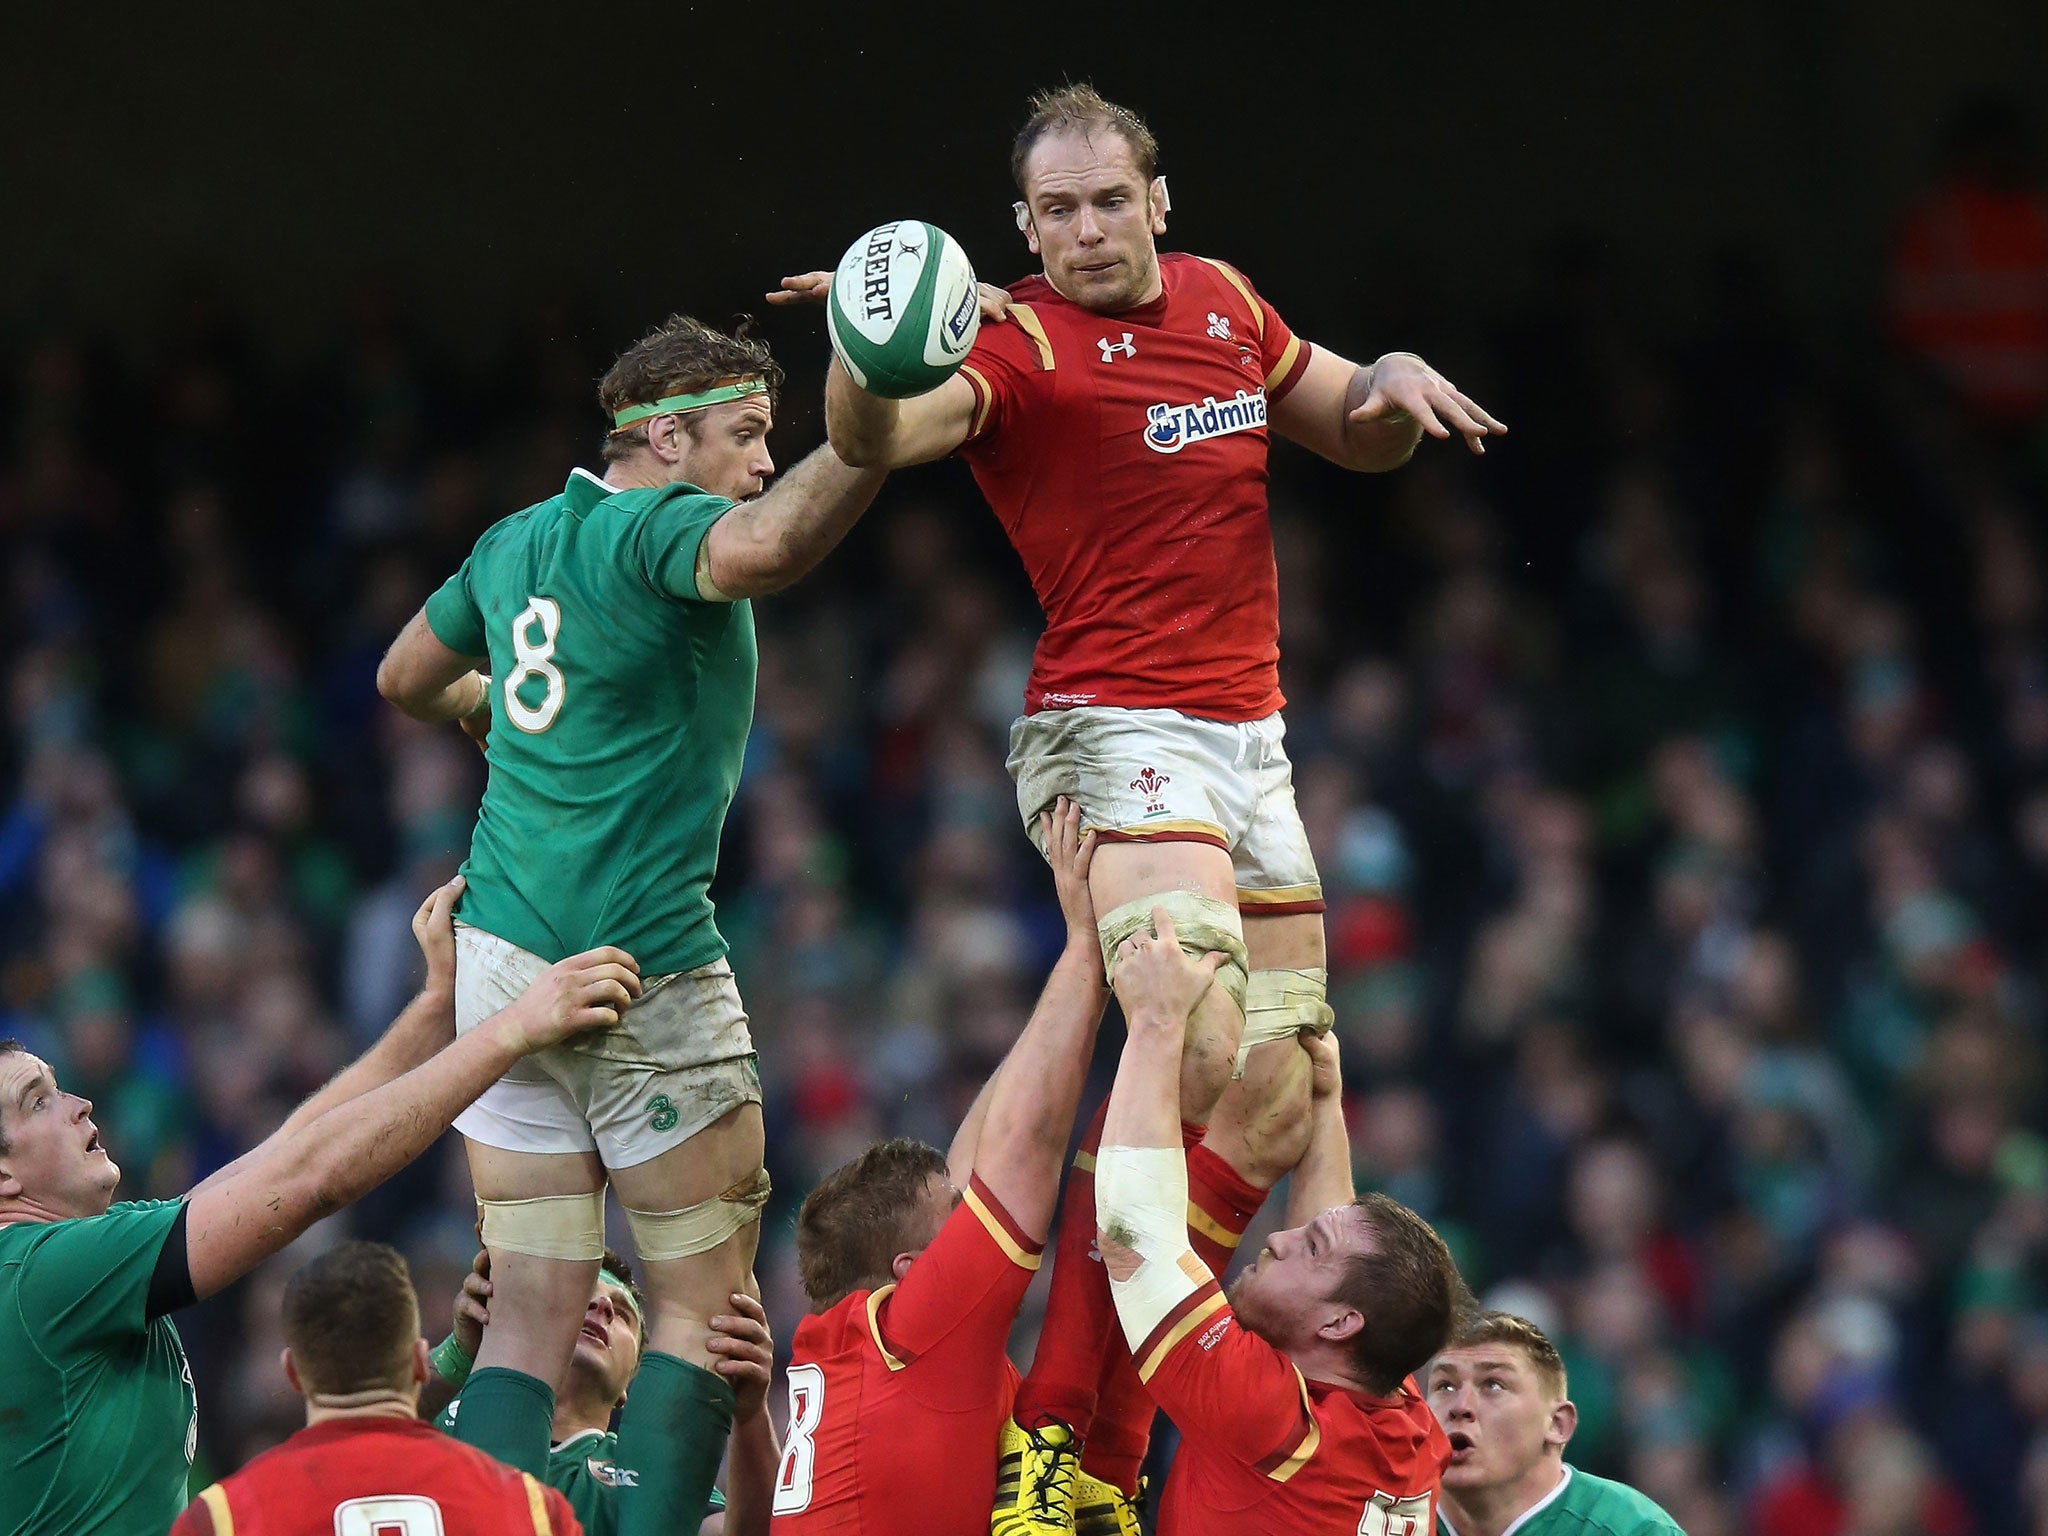 Alun Wyn Jones will captain Wales for the Six Nations (Getty)